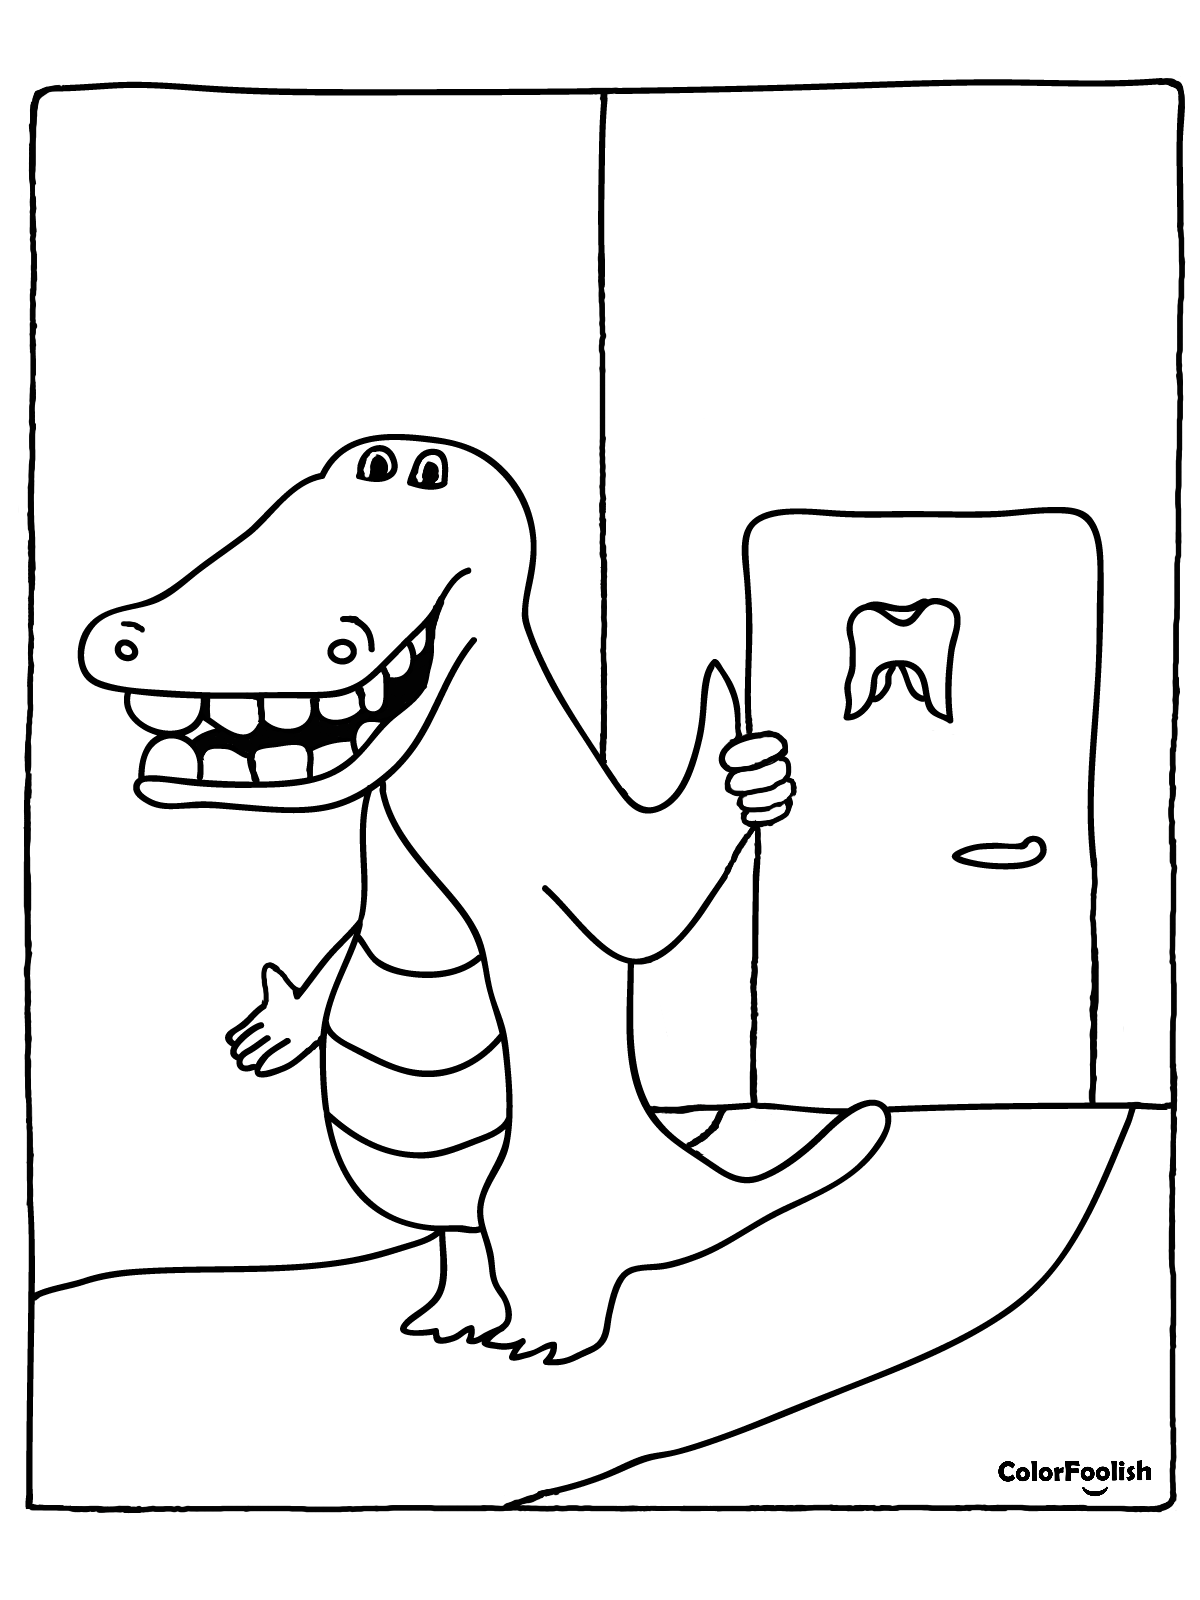 Coloring page of a crocodile at the dentist